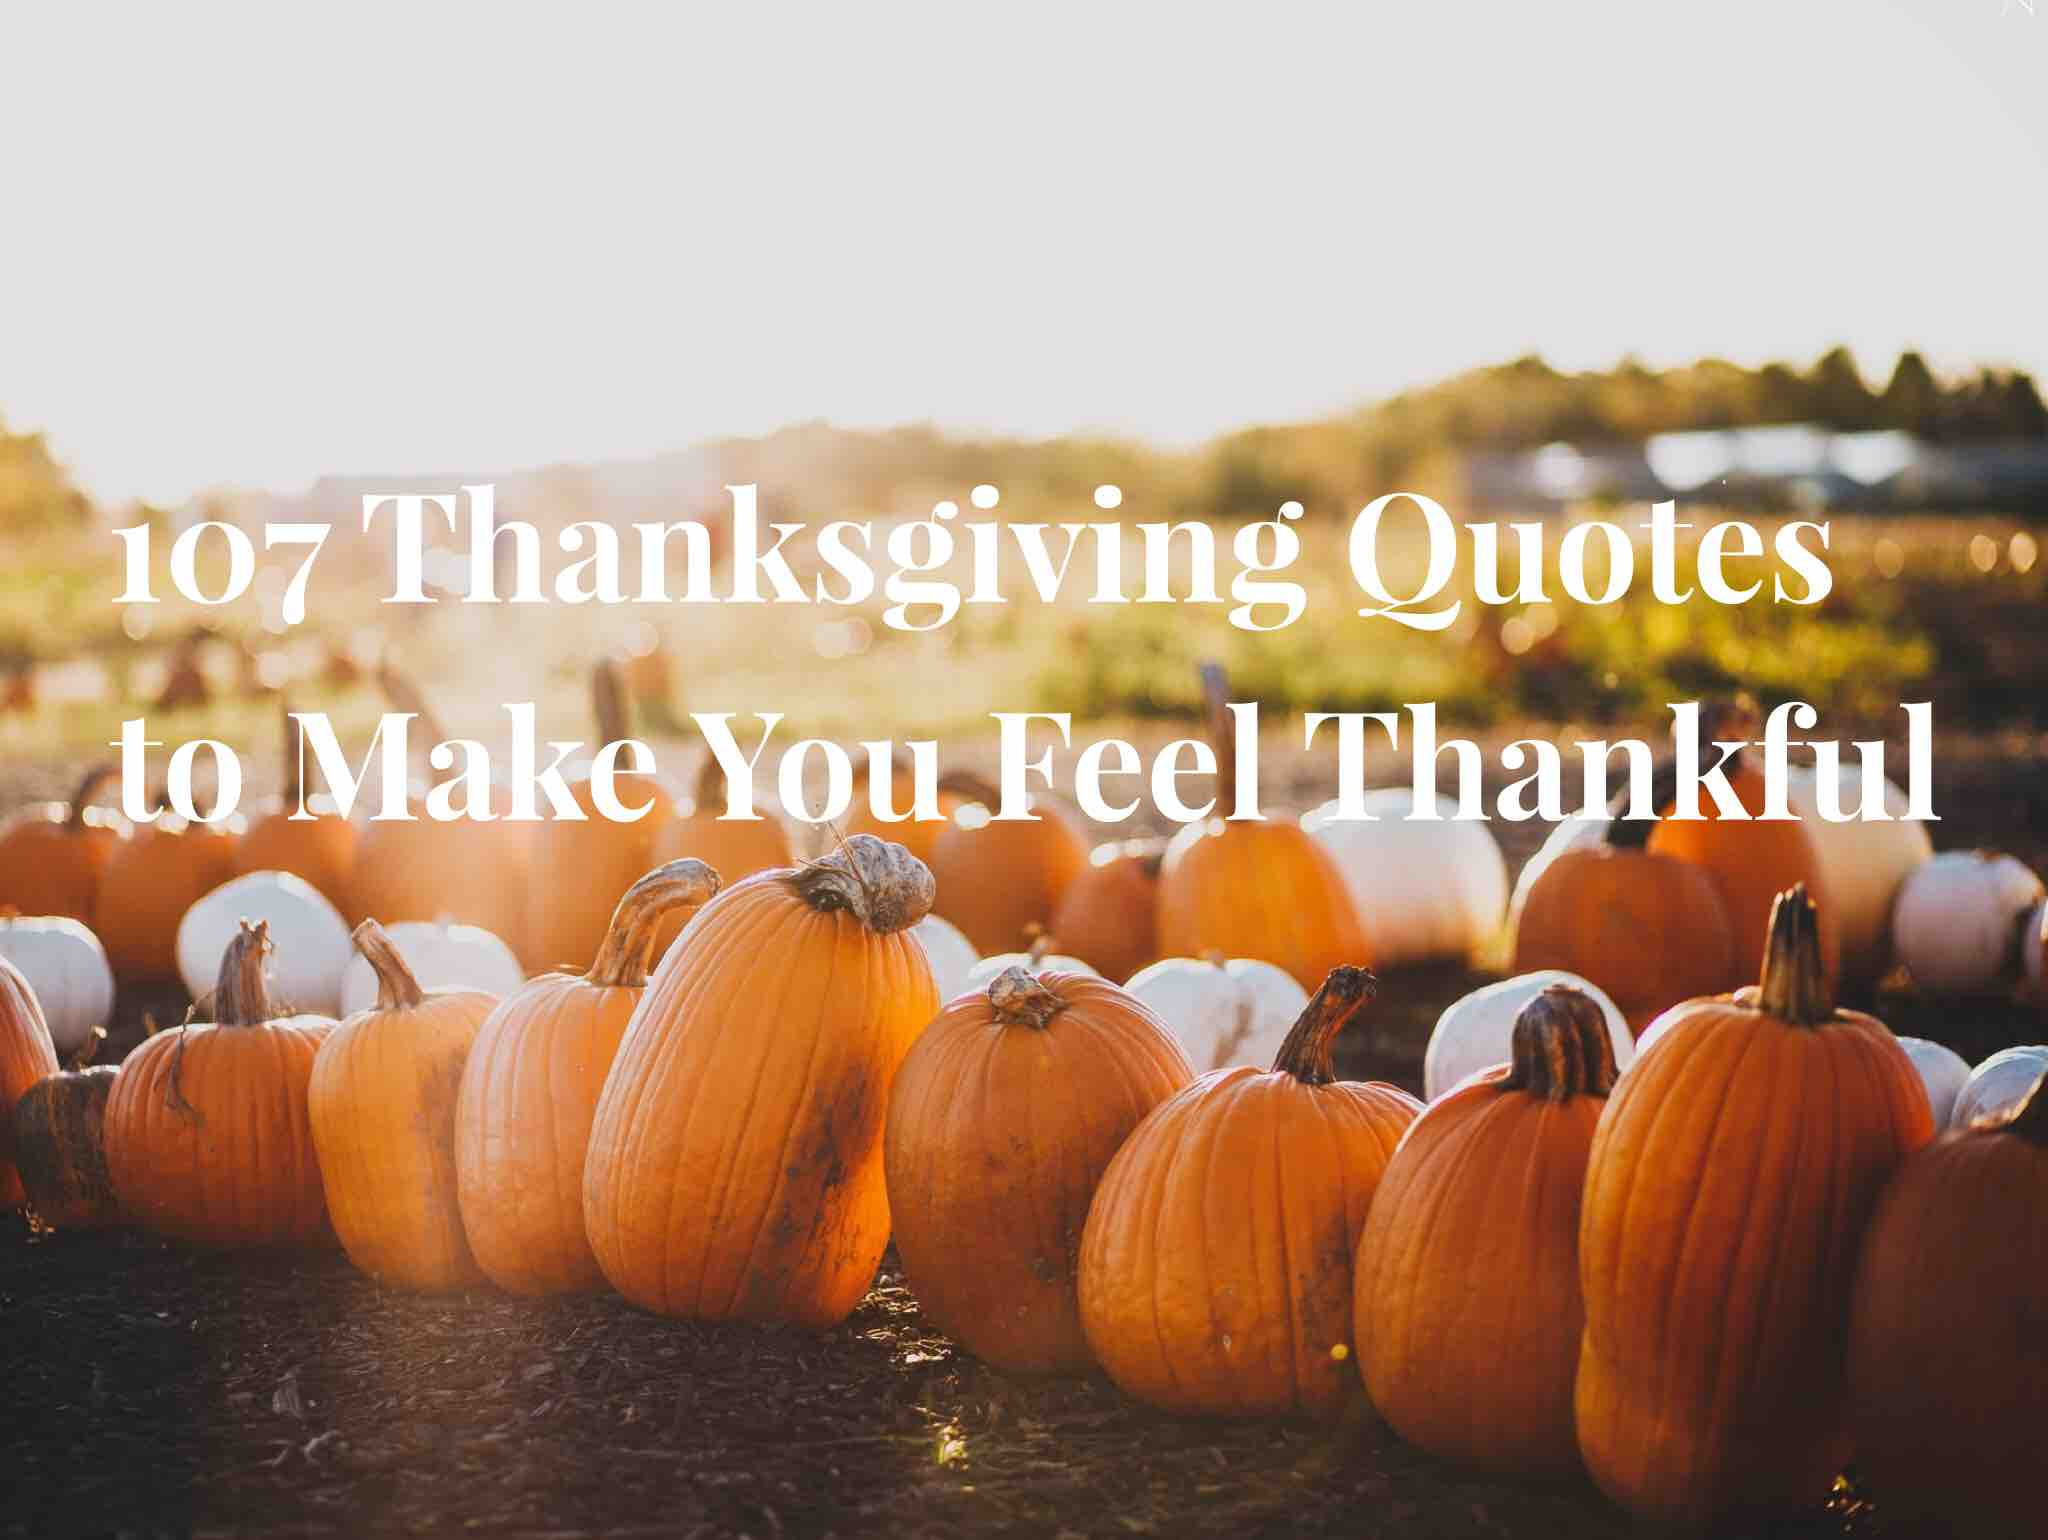 Thanksgiving Quotes Thankful
 107 Thanksgiving Quotes to Make You Feel Thankful